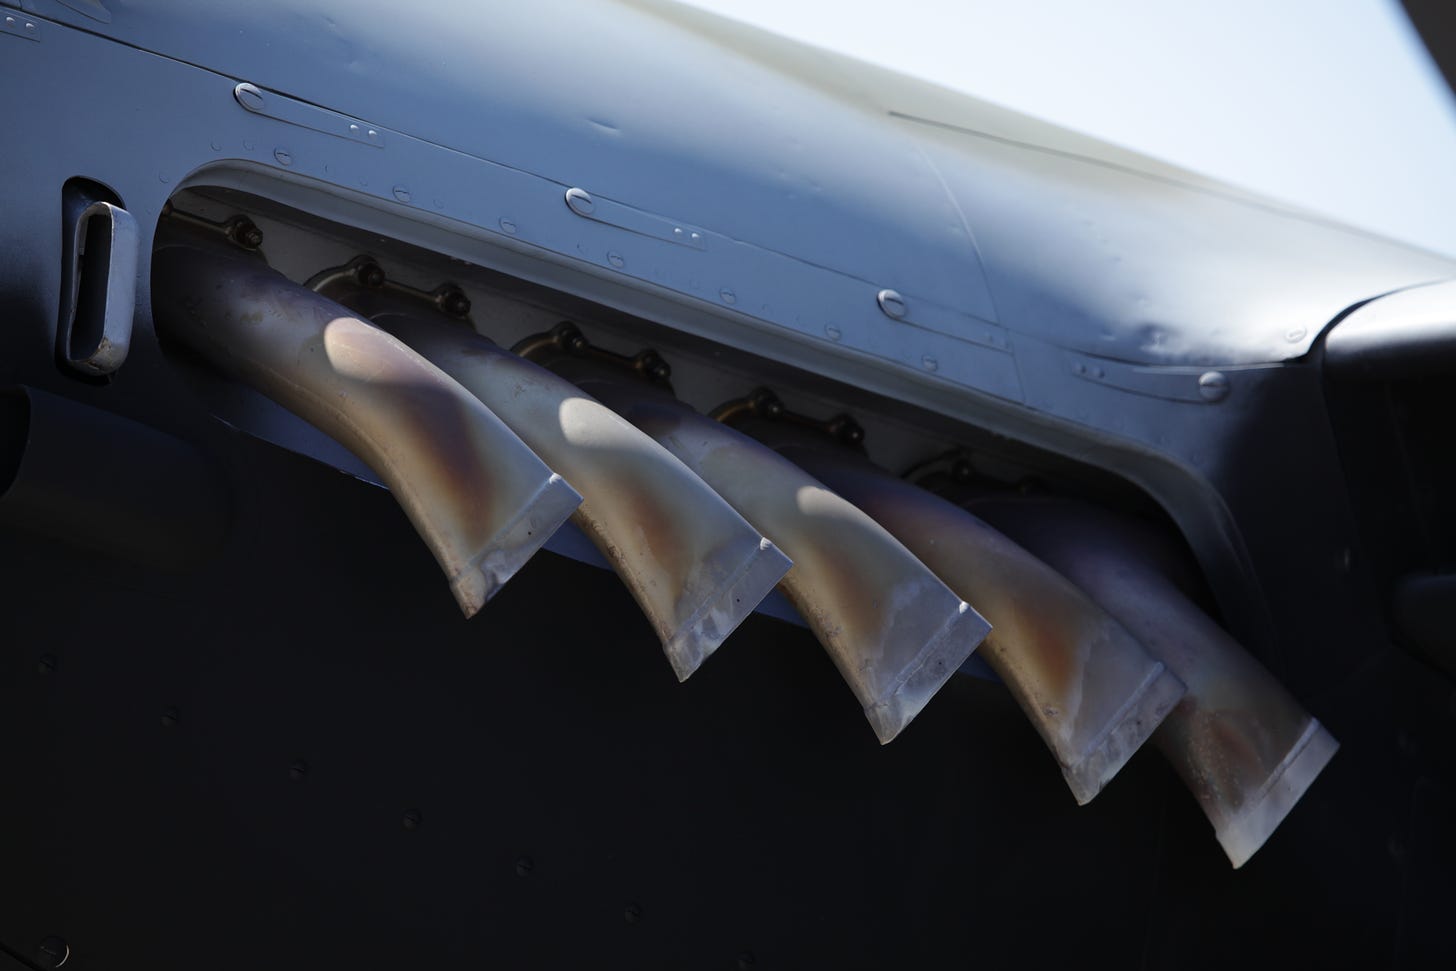 A close-up photograph of plane exhaust pipes.